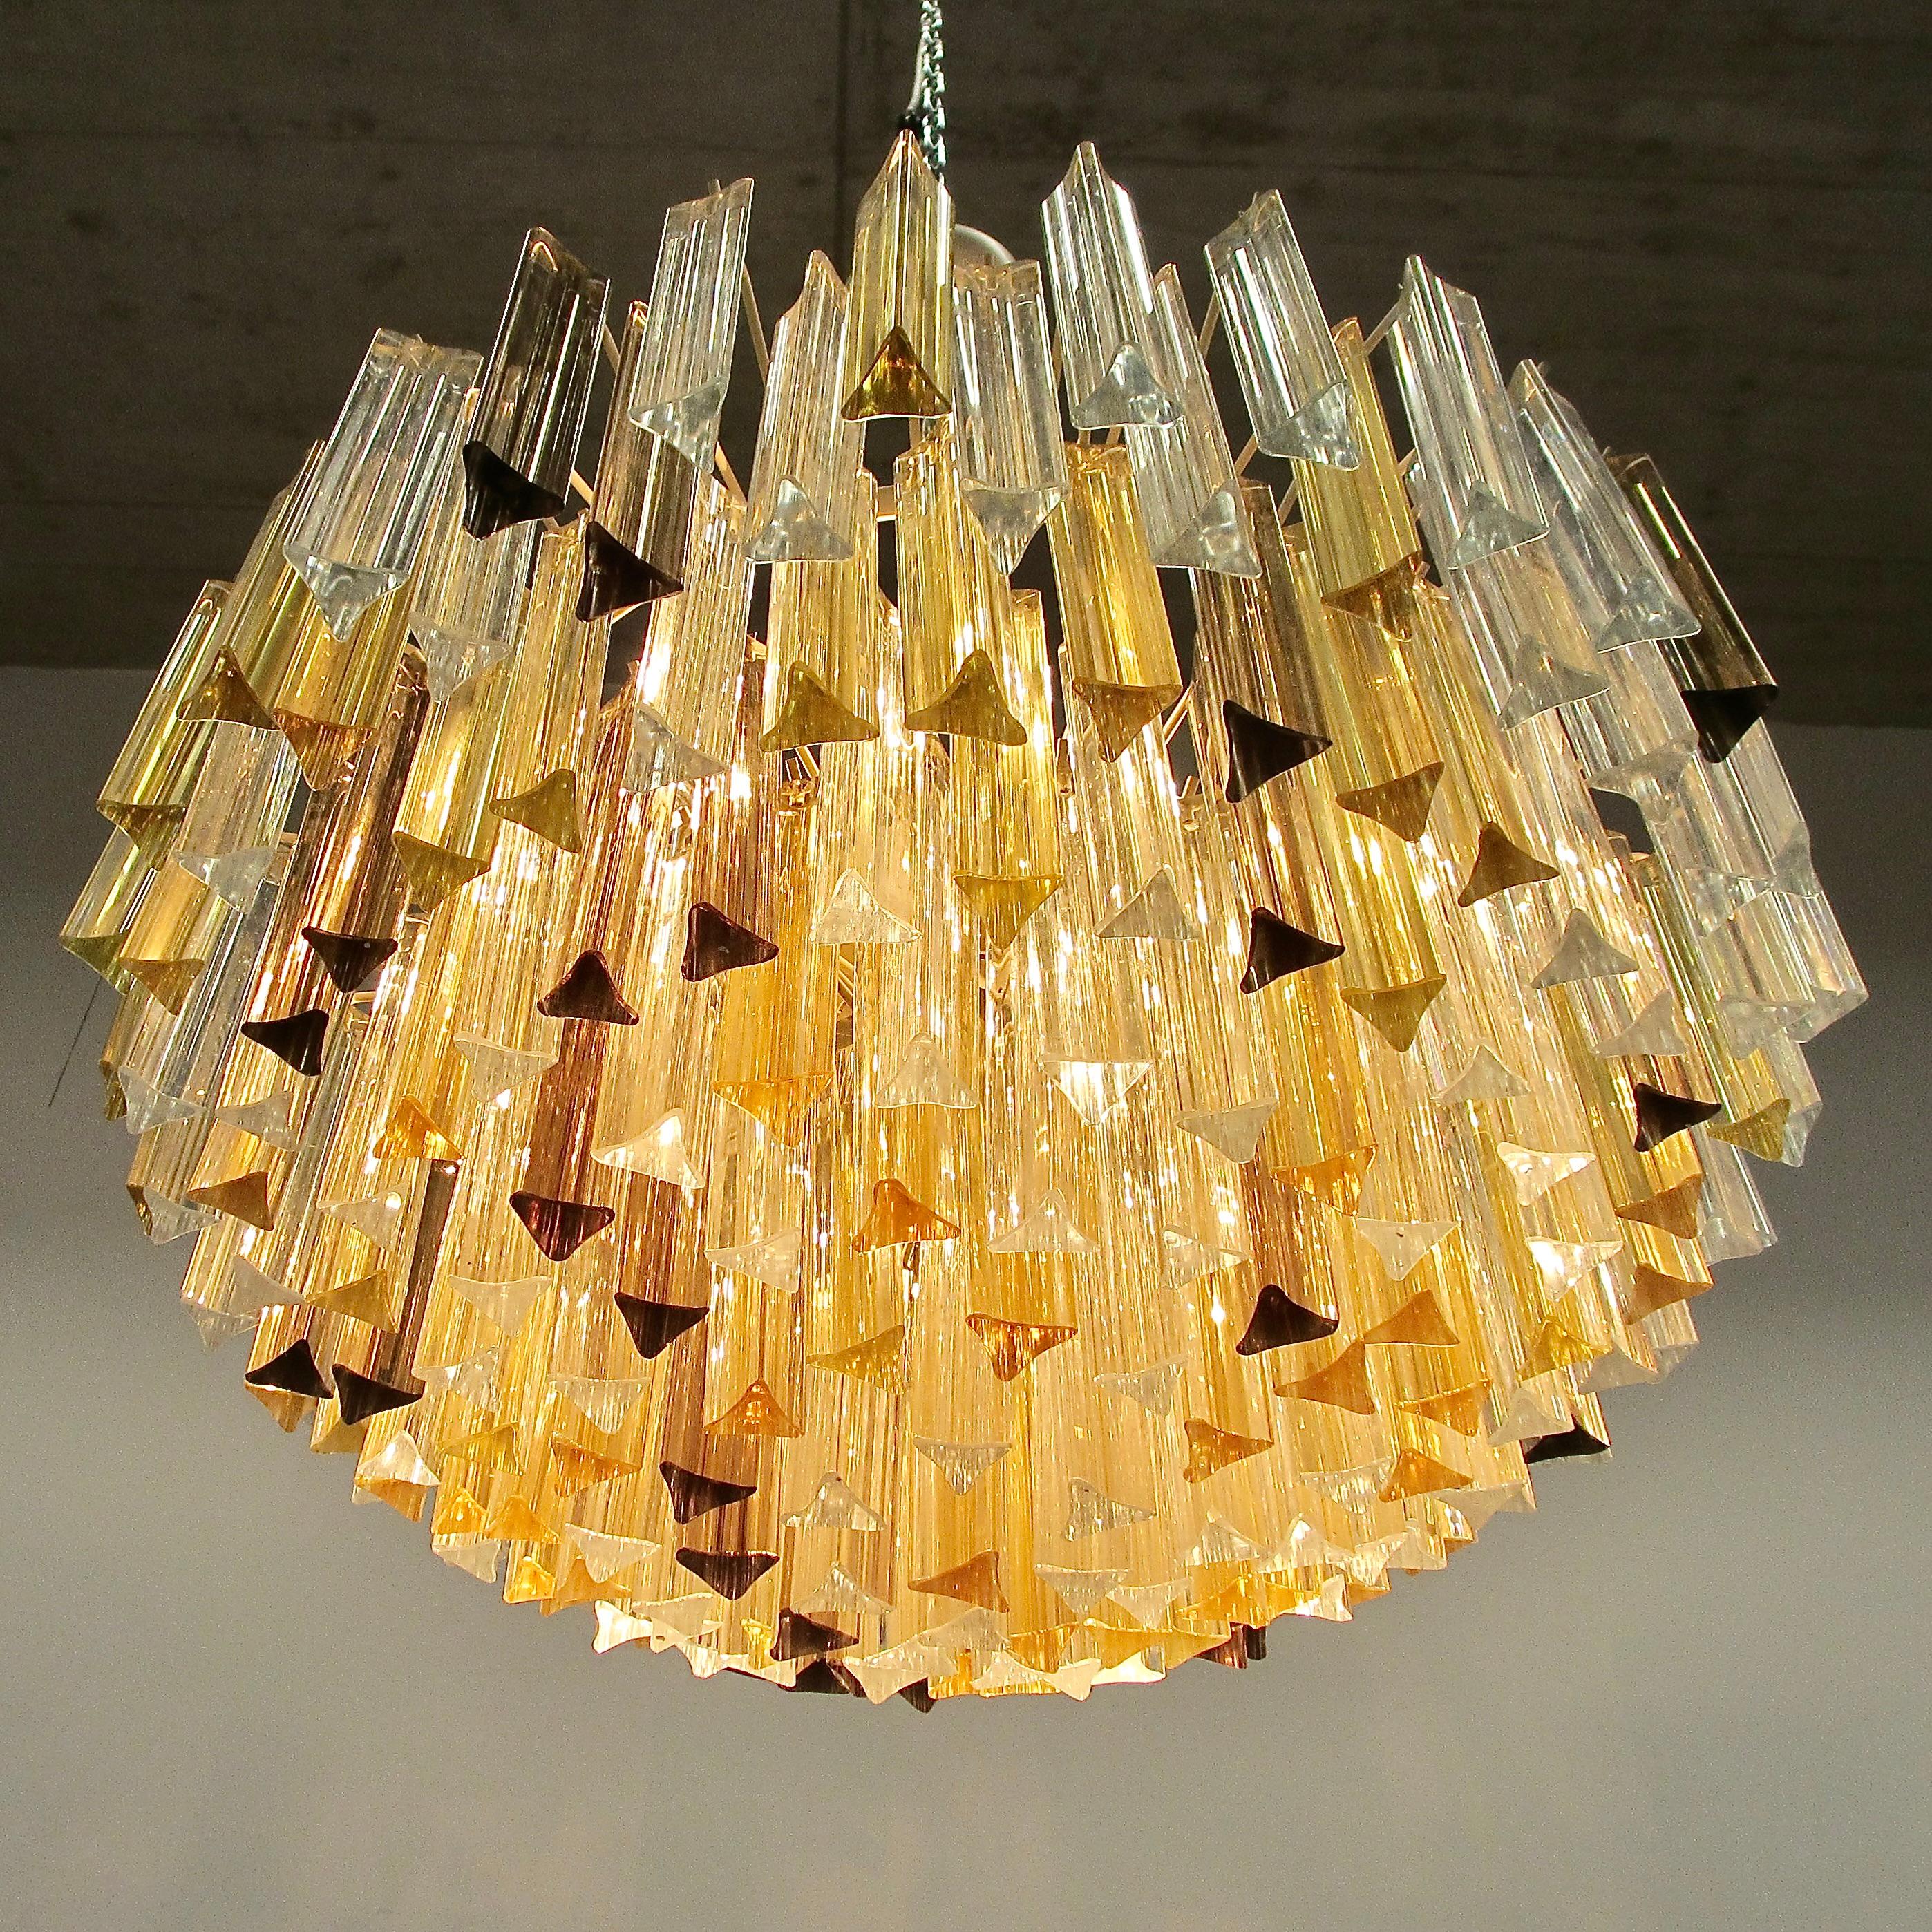 'TRILOBI' glass chandelier. Italy, Murano.

Large glass chandelier with clear and amber coloured 'Trilobi' glass made in Murano, c. 1980. Multi-tier glass chandelier with cream coloured frame, nine E15 light fittings and Trilobi glass pieces.